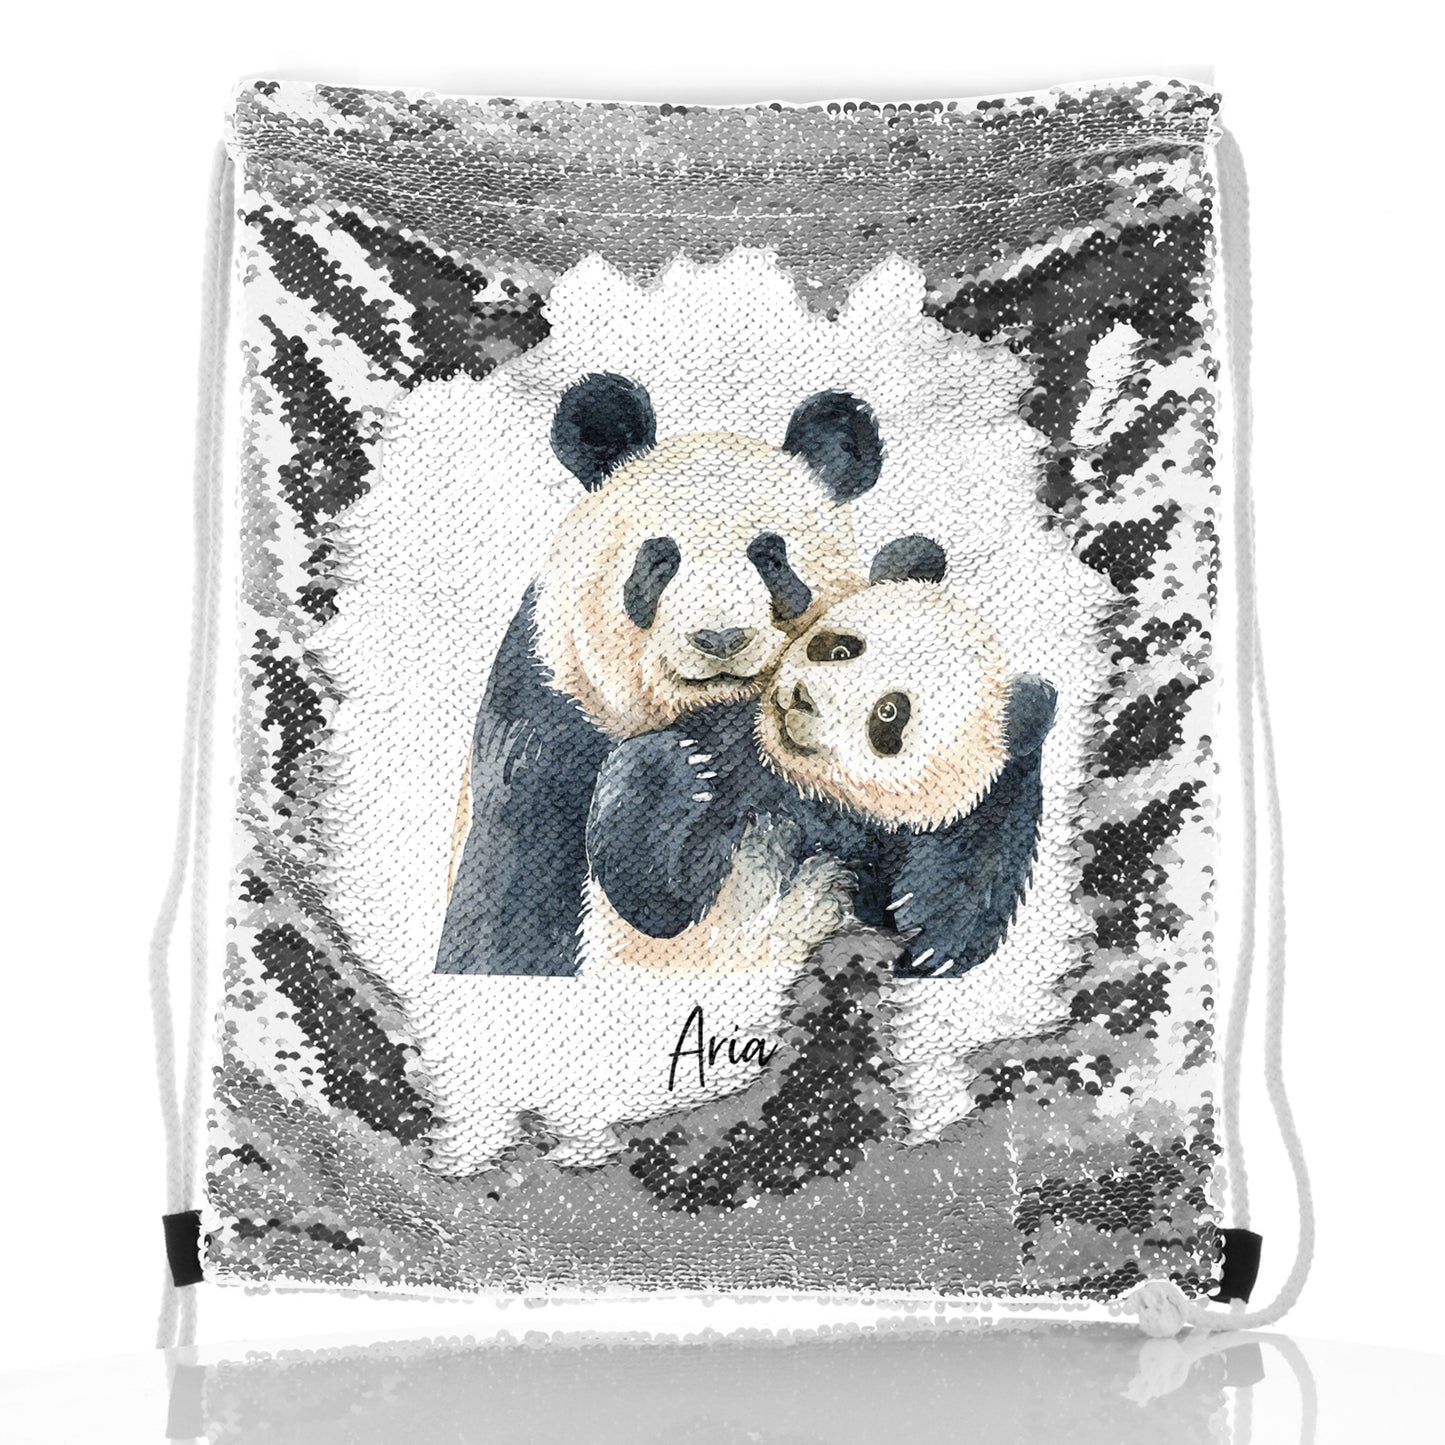 Personalised Sequin Drawstring Backpack with Welcoming Text and Embracing Mum and Baby Pandas